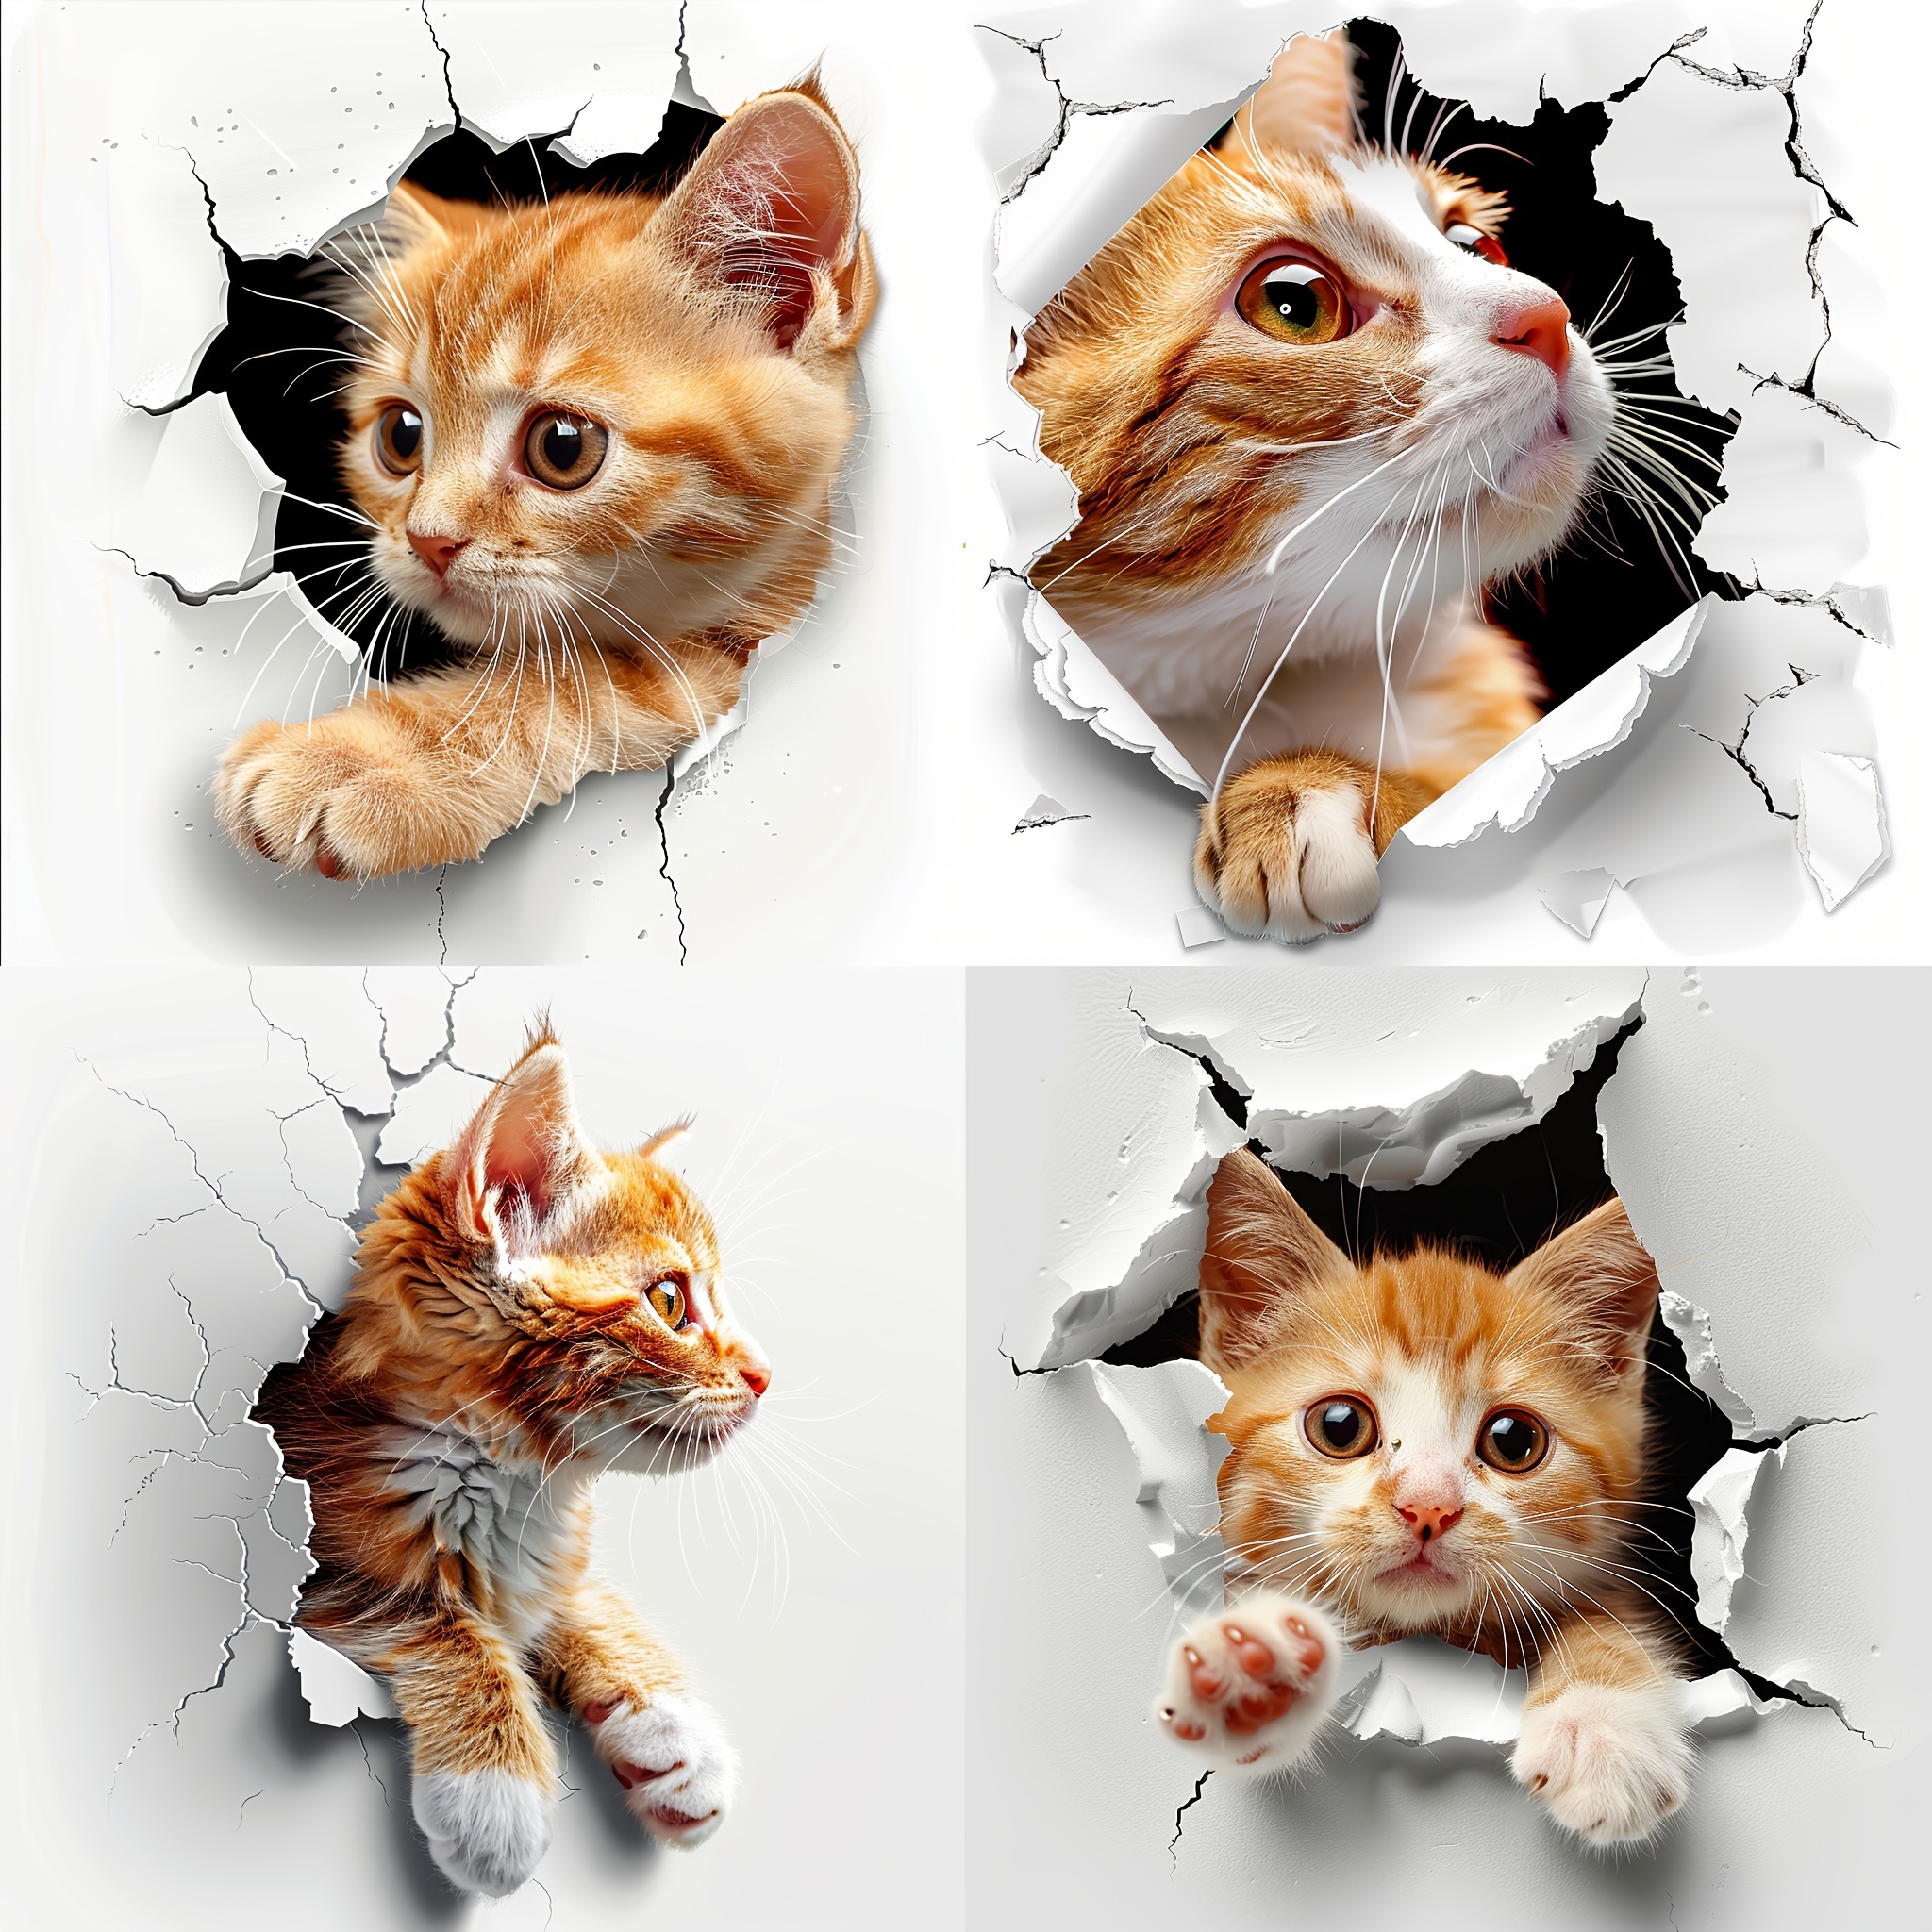 

4in1 Cat Anime Stickers Tpu Material, Double-layer Colour Composite Printing, For Cars, Windows, Laptops